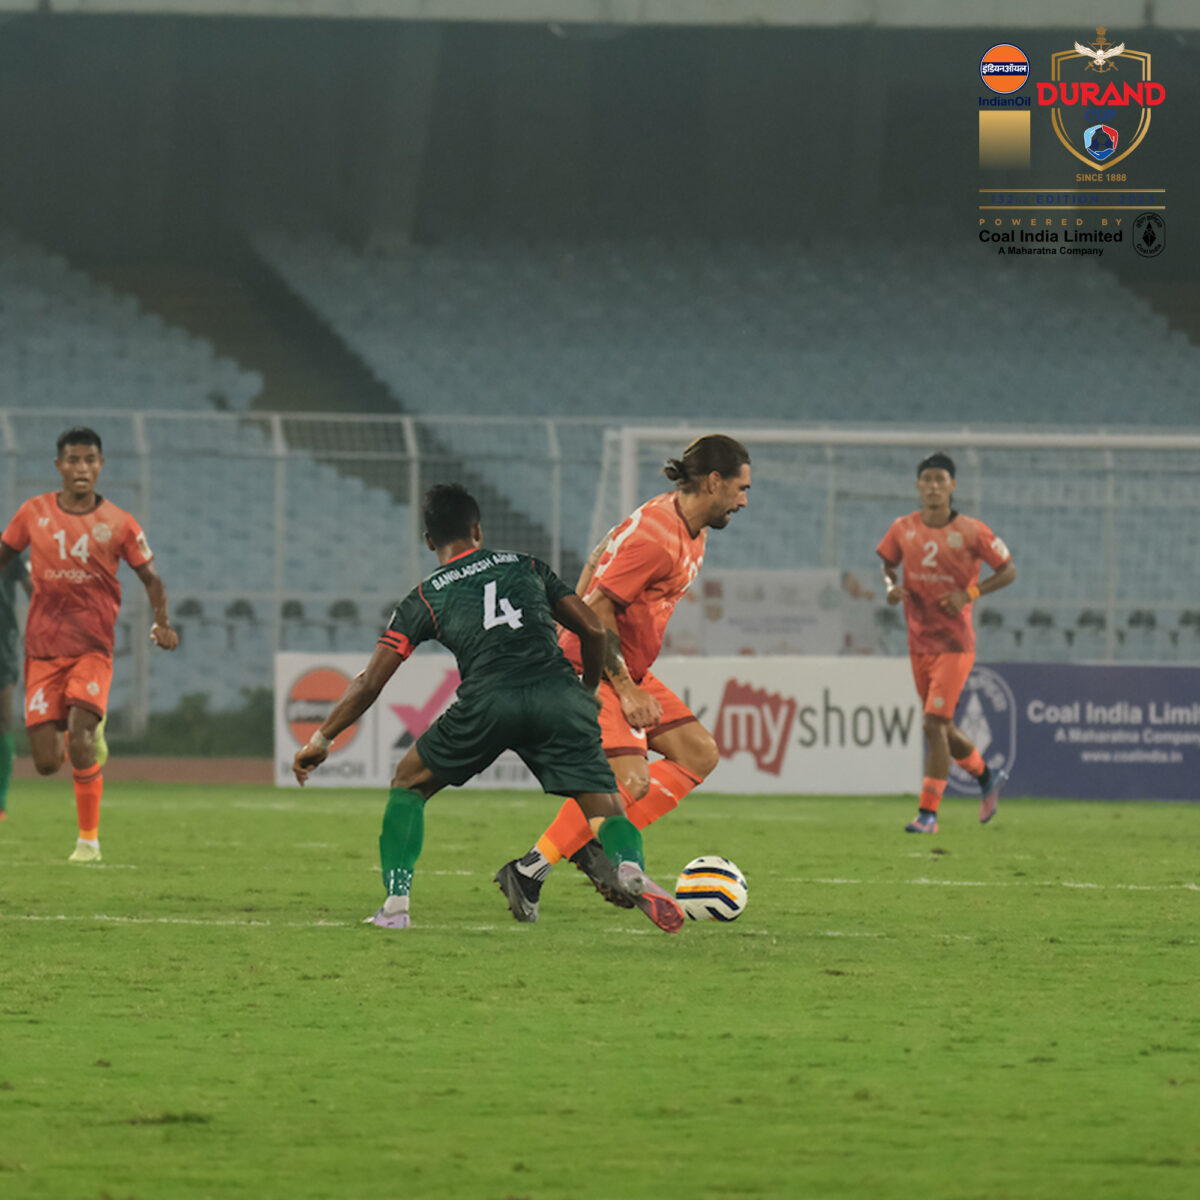 132nd IndianOil Durand Cup Match Report: Punjab FC and Bangladesh Army FT play out a goalless draw